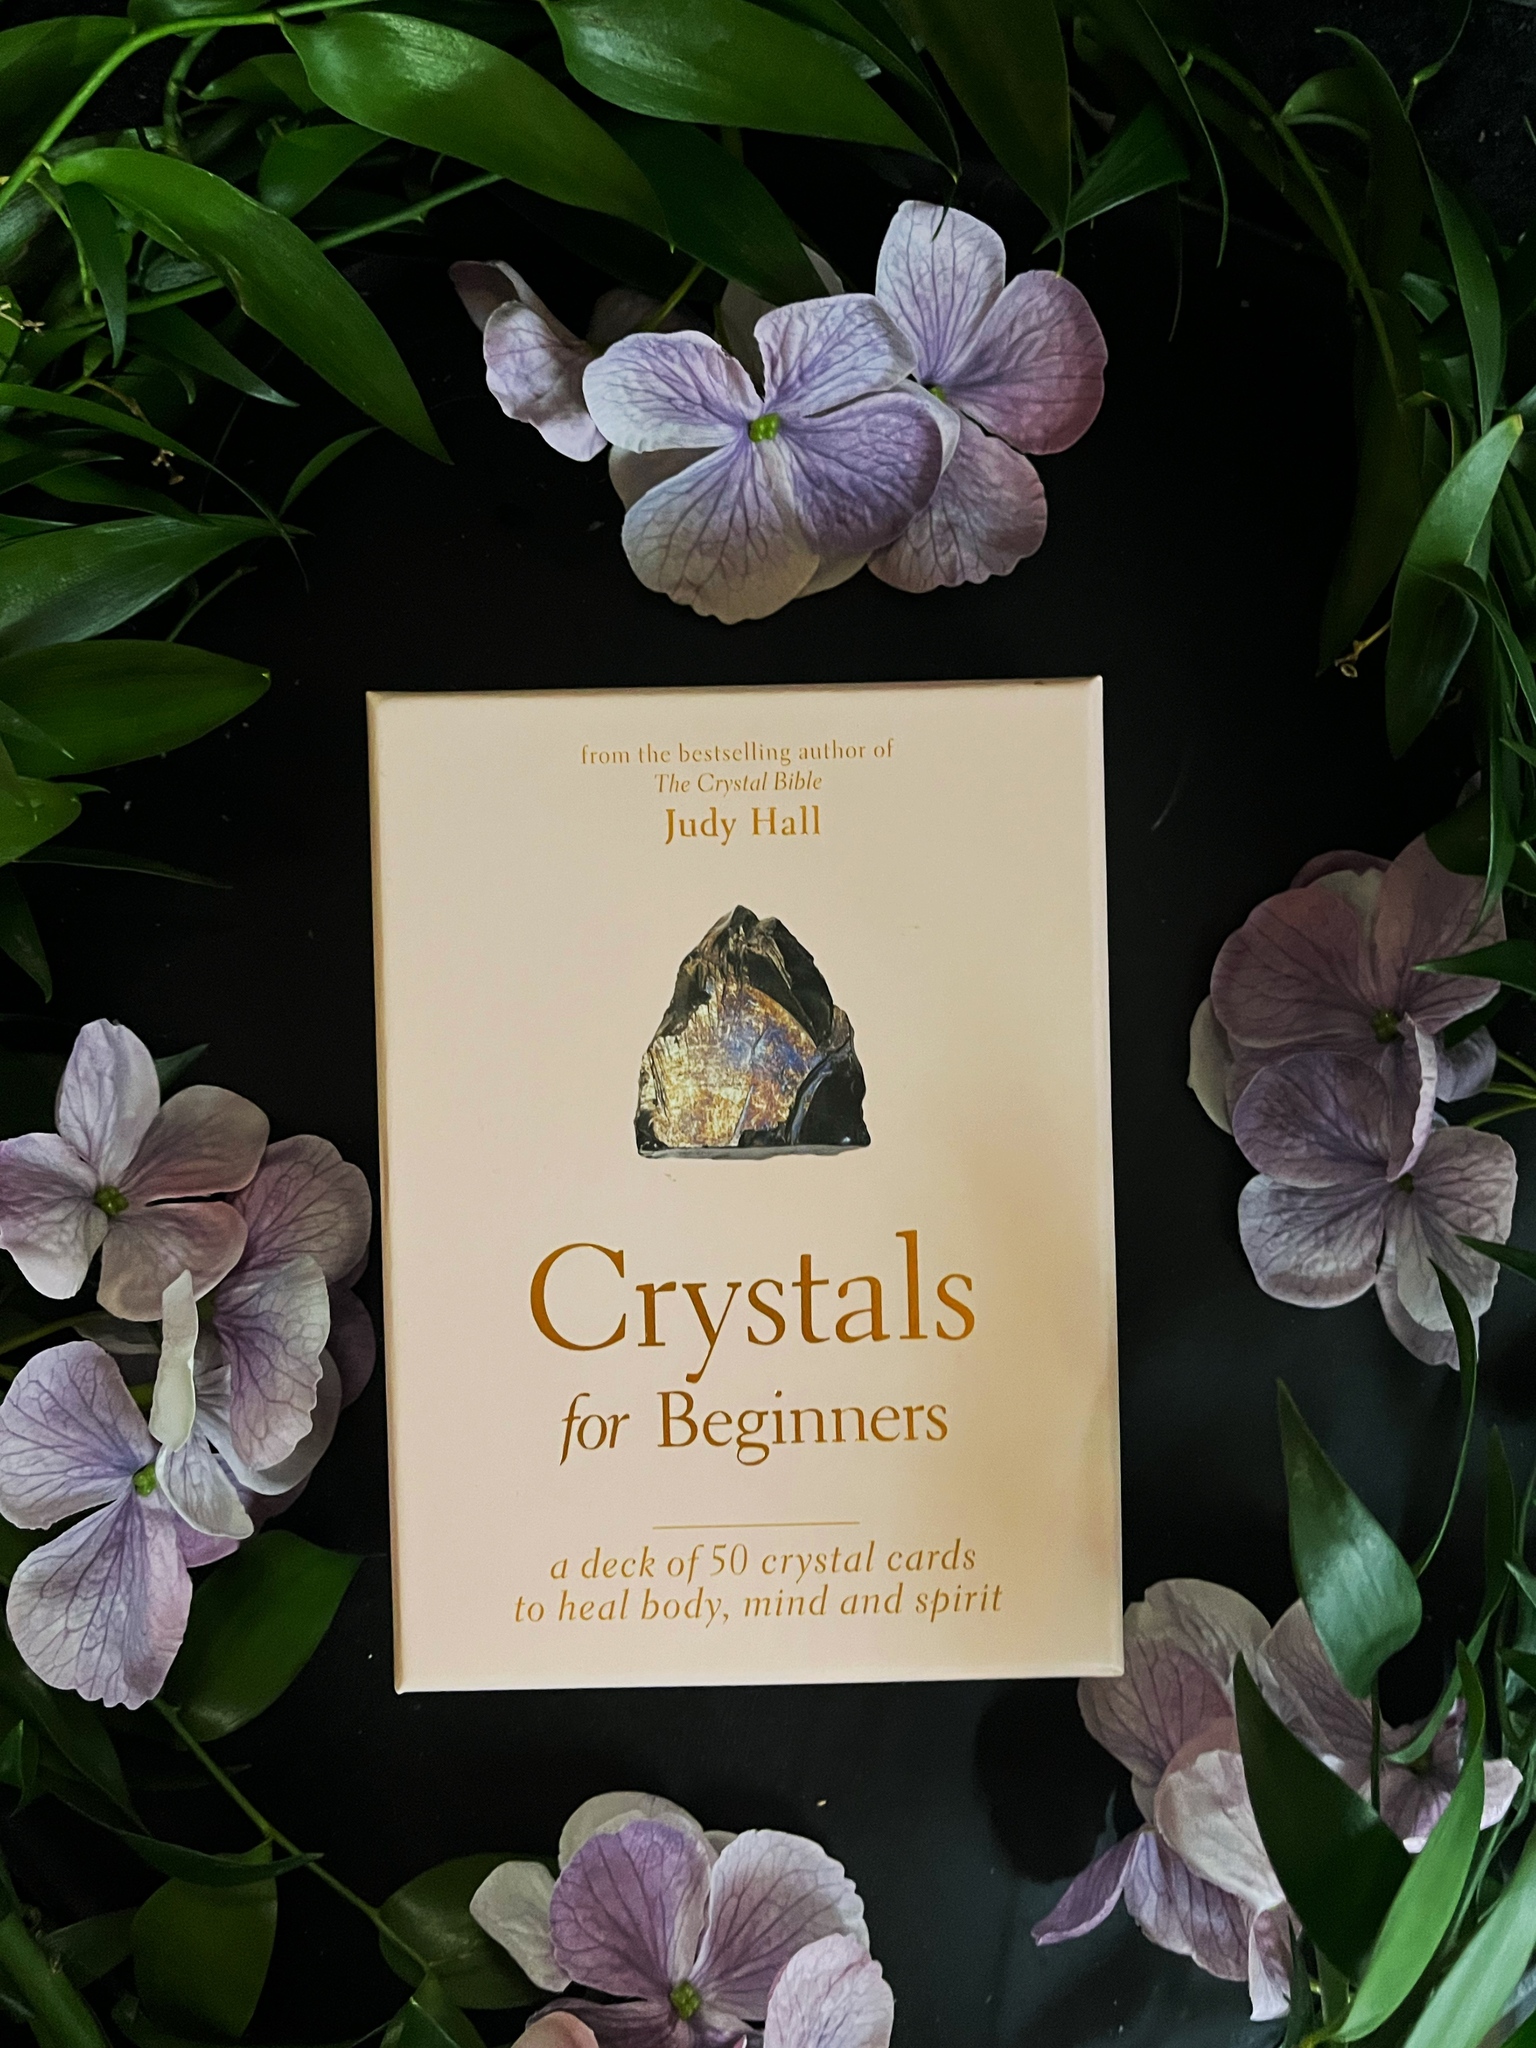 Crystals for beginners